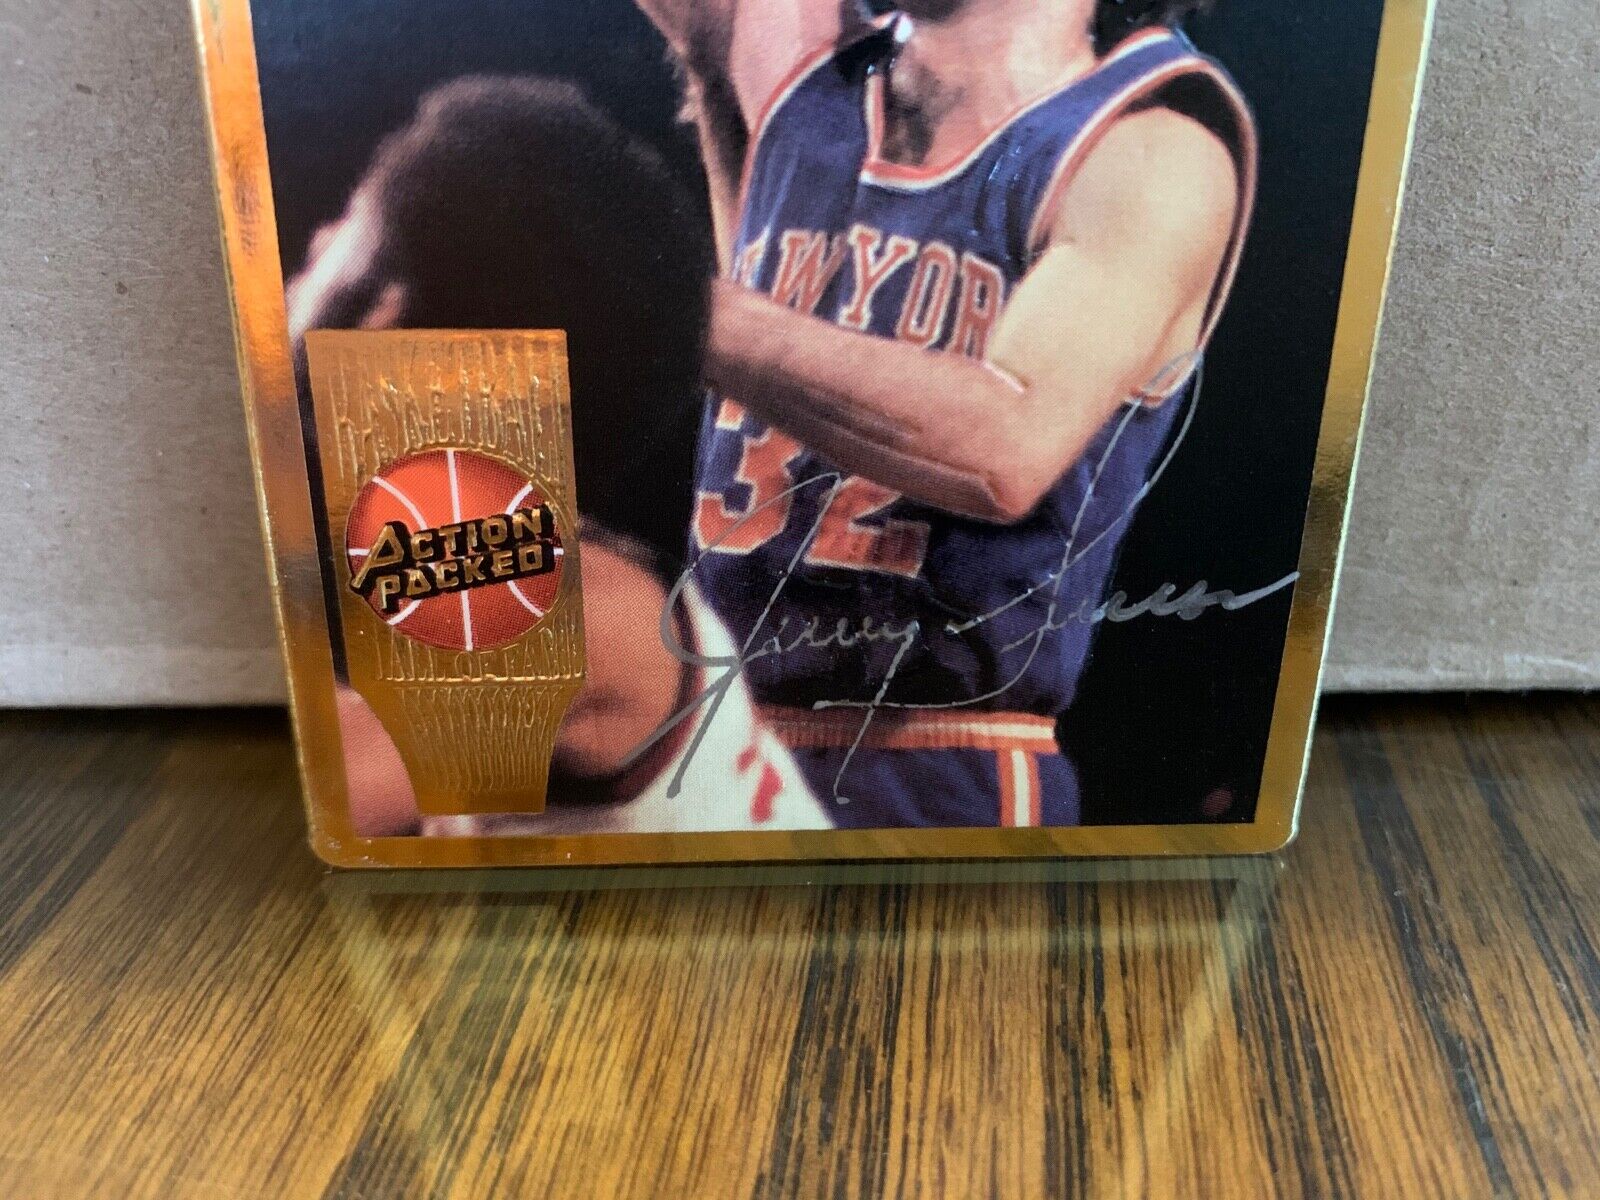 Jerry Lucas New York Knicks Autographed 1994 Action Packed Auto Signed Card 24